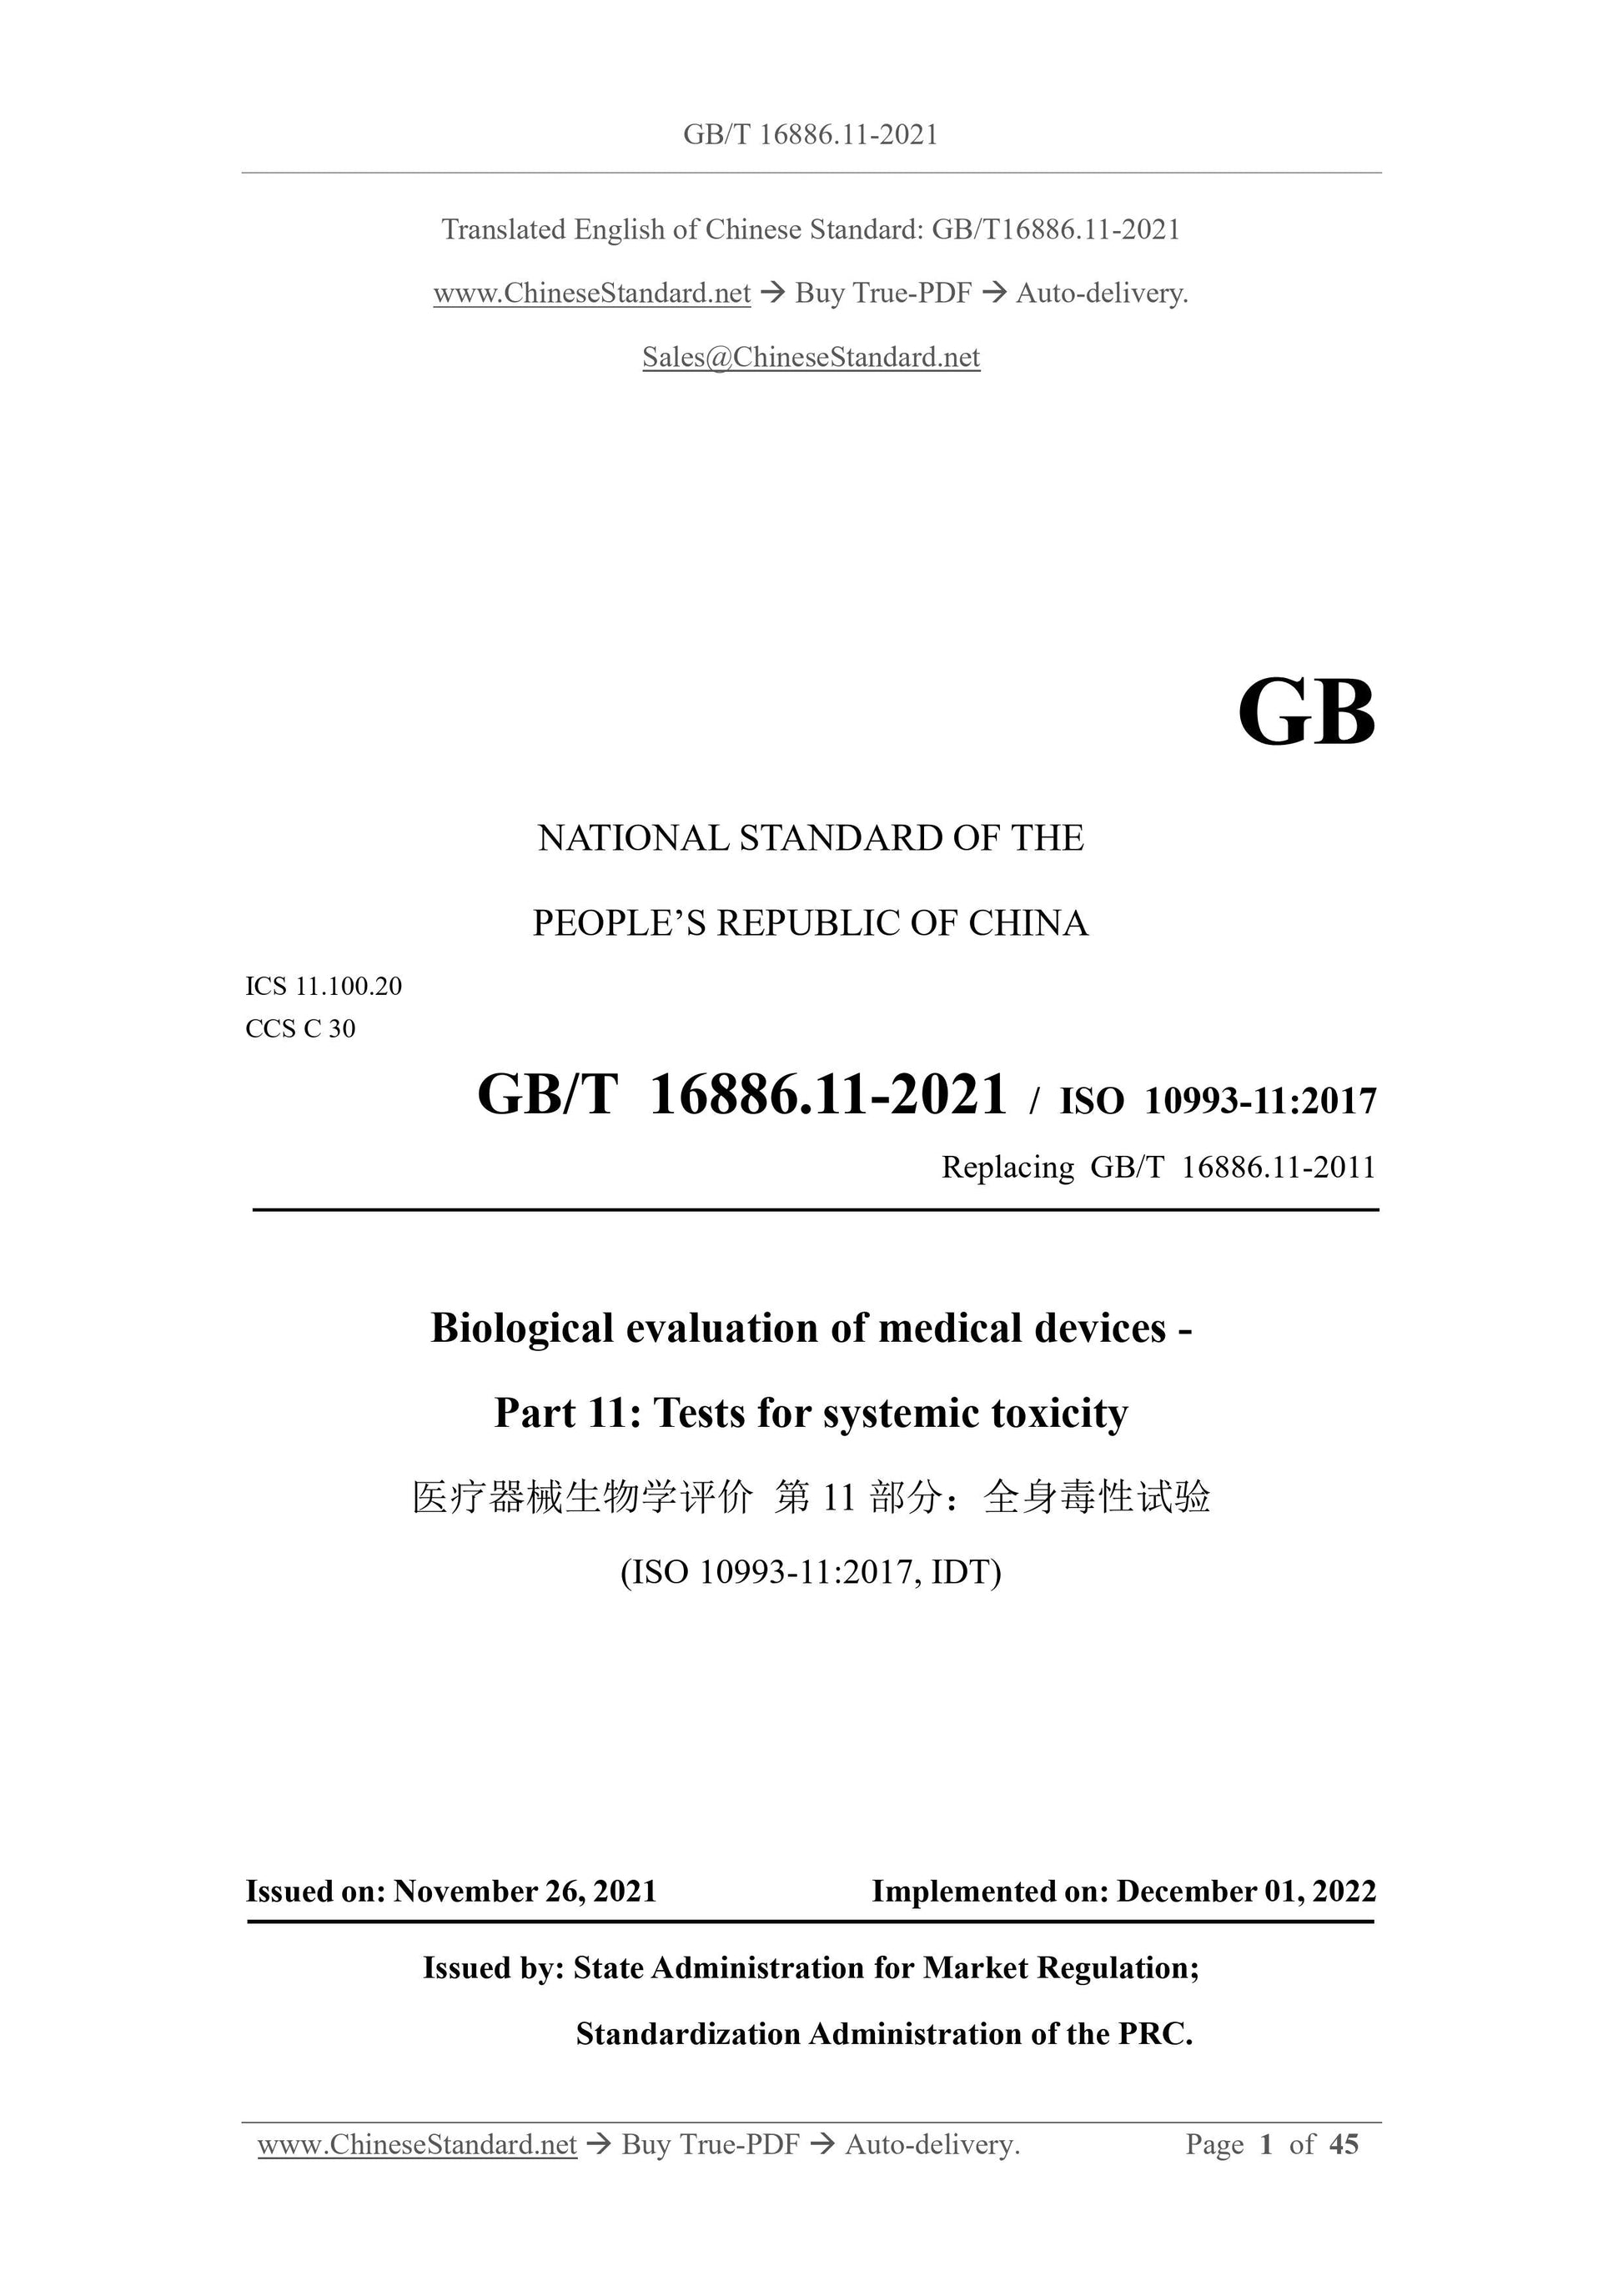 GB/T 16886.11-2021 Page 1